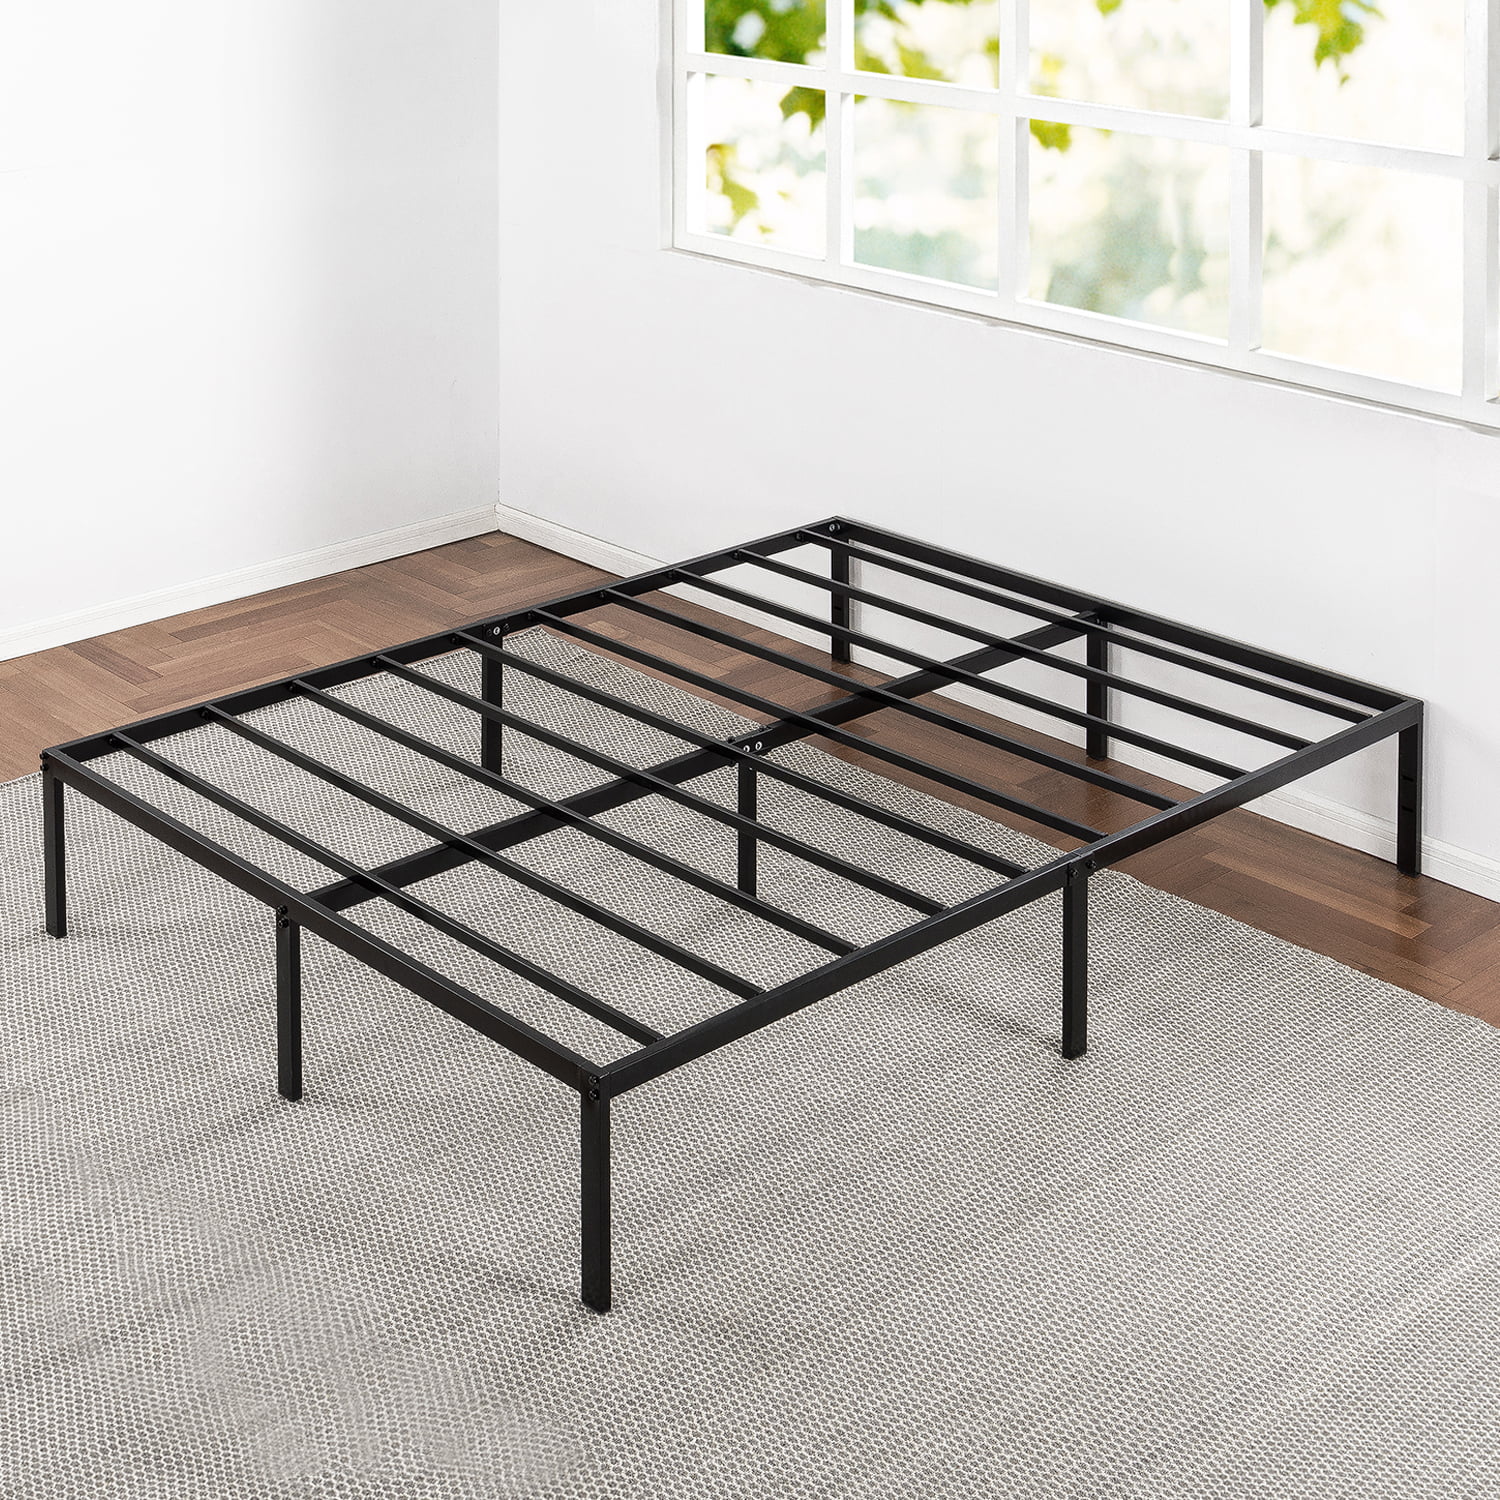 14 inch Tall Metal Platform Bed Frame Steel Slat Twin Full Queen King Size Bed 